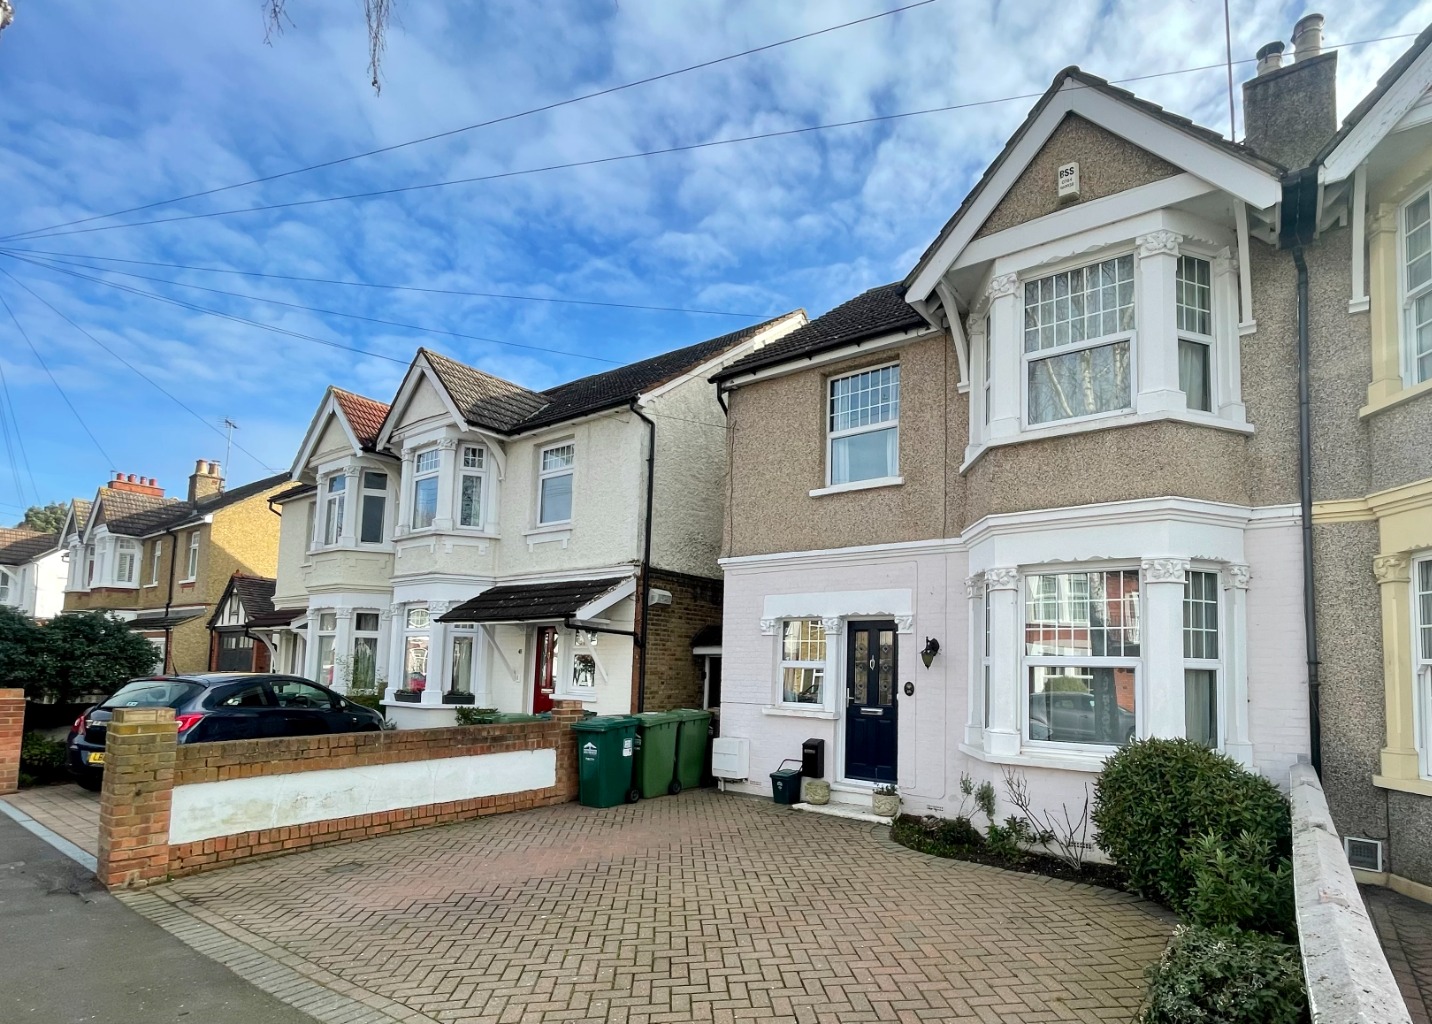 This Edwardian home originally built in 1908 is perfect for families, located in one of the most sought after roads due to it being walking distance to everything from the train station and town centre, riverside, local schools for all ages, not forgetting the parks and gyms.